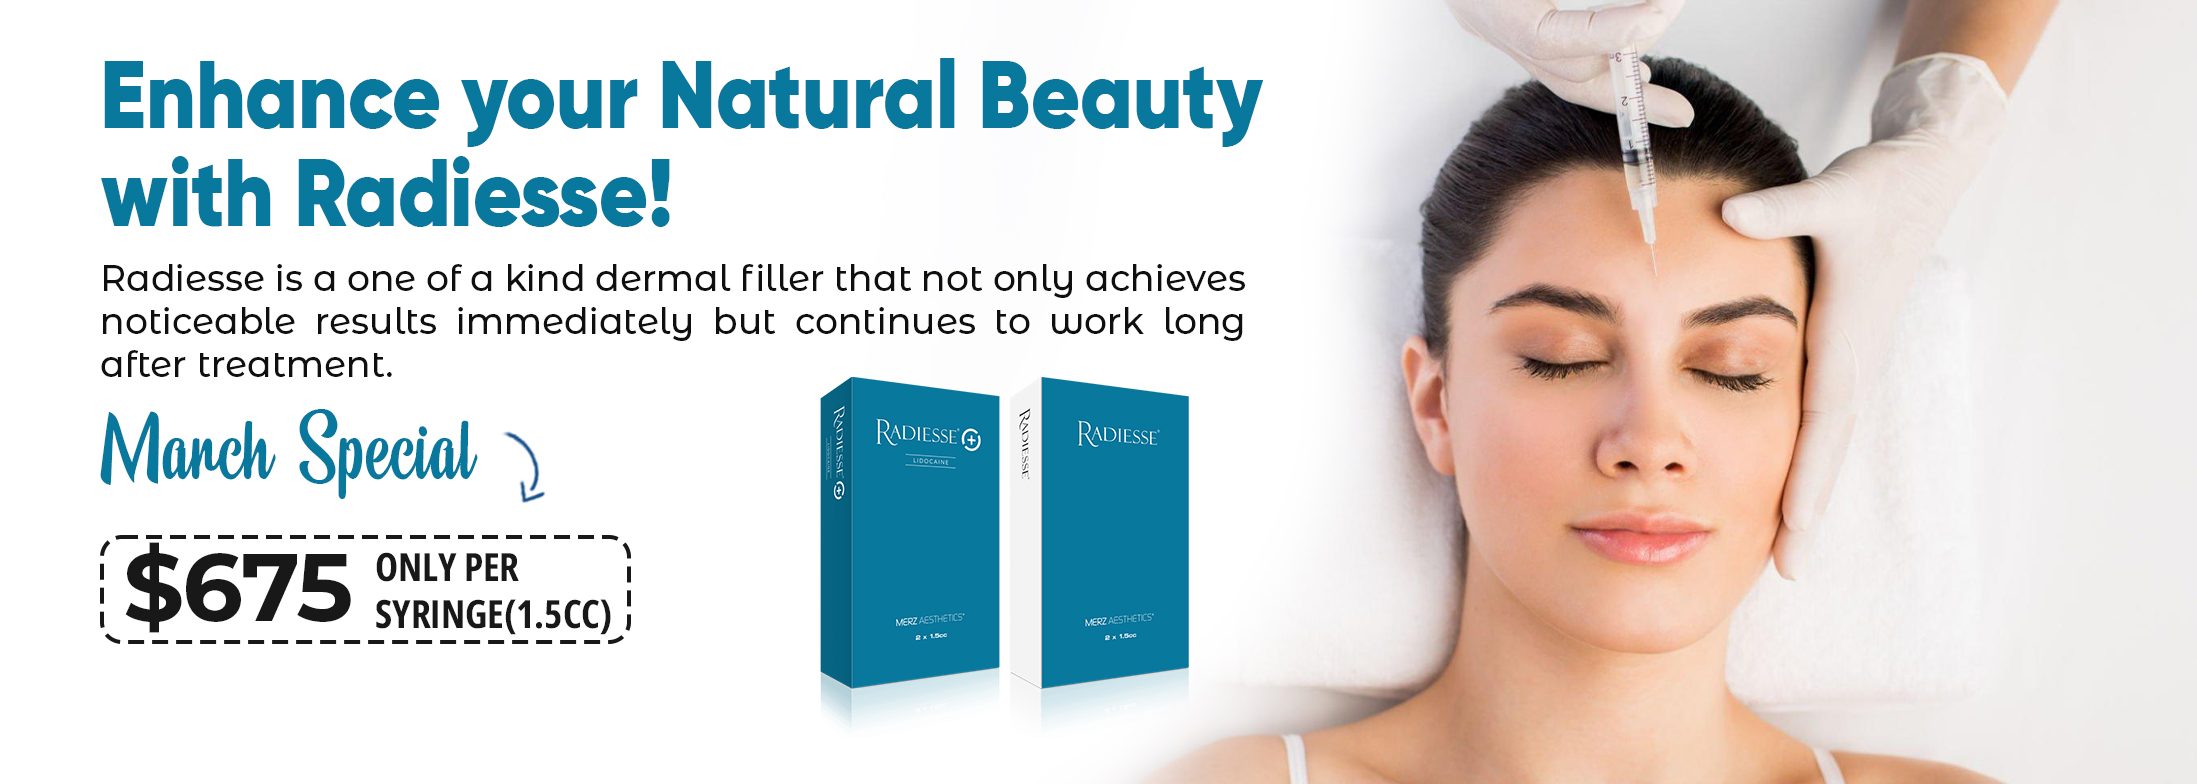 Rediscover Your Natural Beauty with Radiesse Dermal Filler! March Special : $675 per syringe (1.5cc)